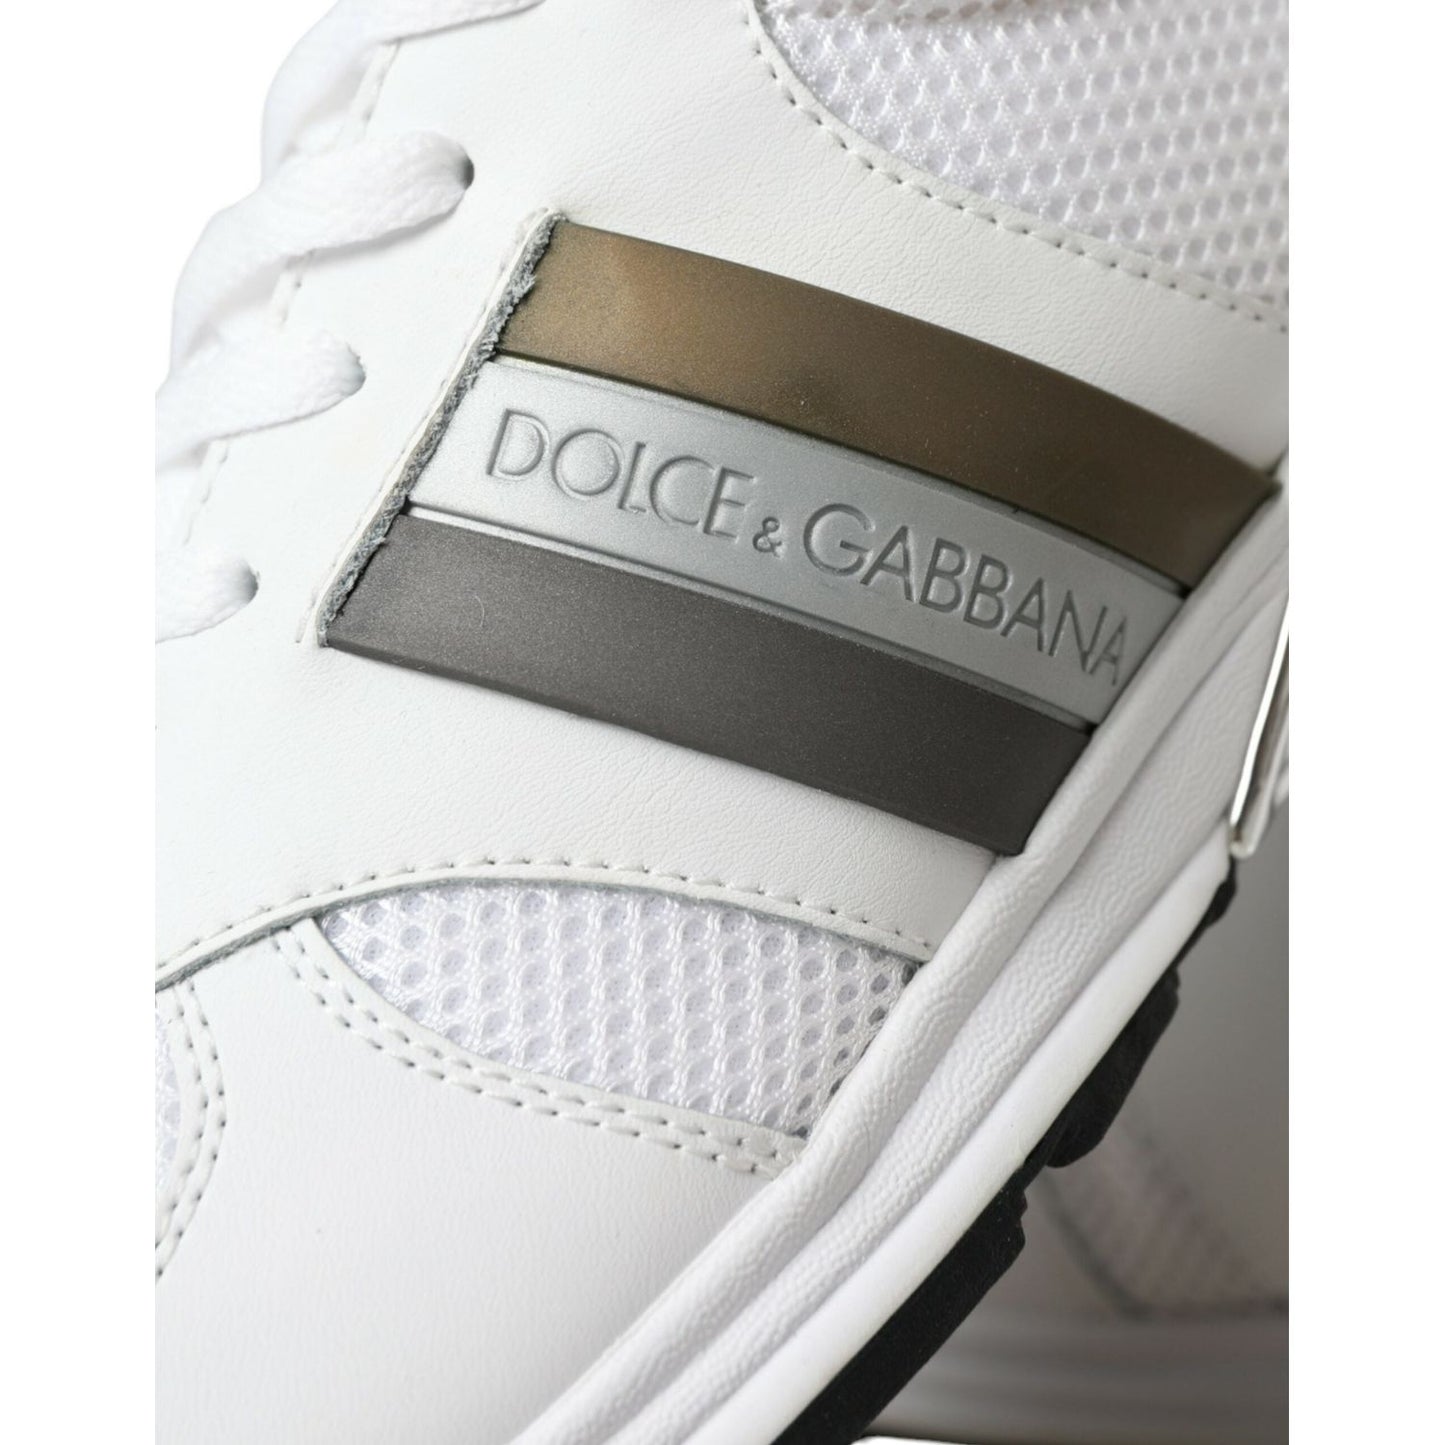 Dolce & Gabbana White Mesh Leather Low Top Trainers Sneakers Shoes white-mesh-leather-low-top-trainers-sneakers-shoes